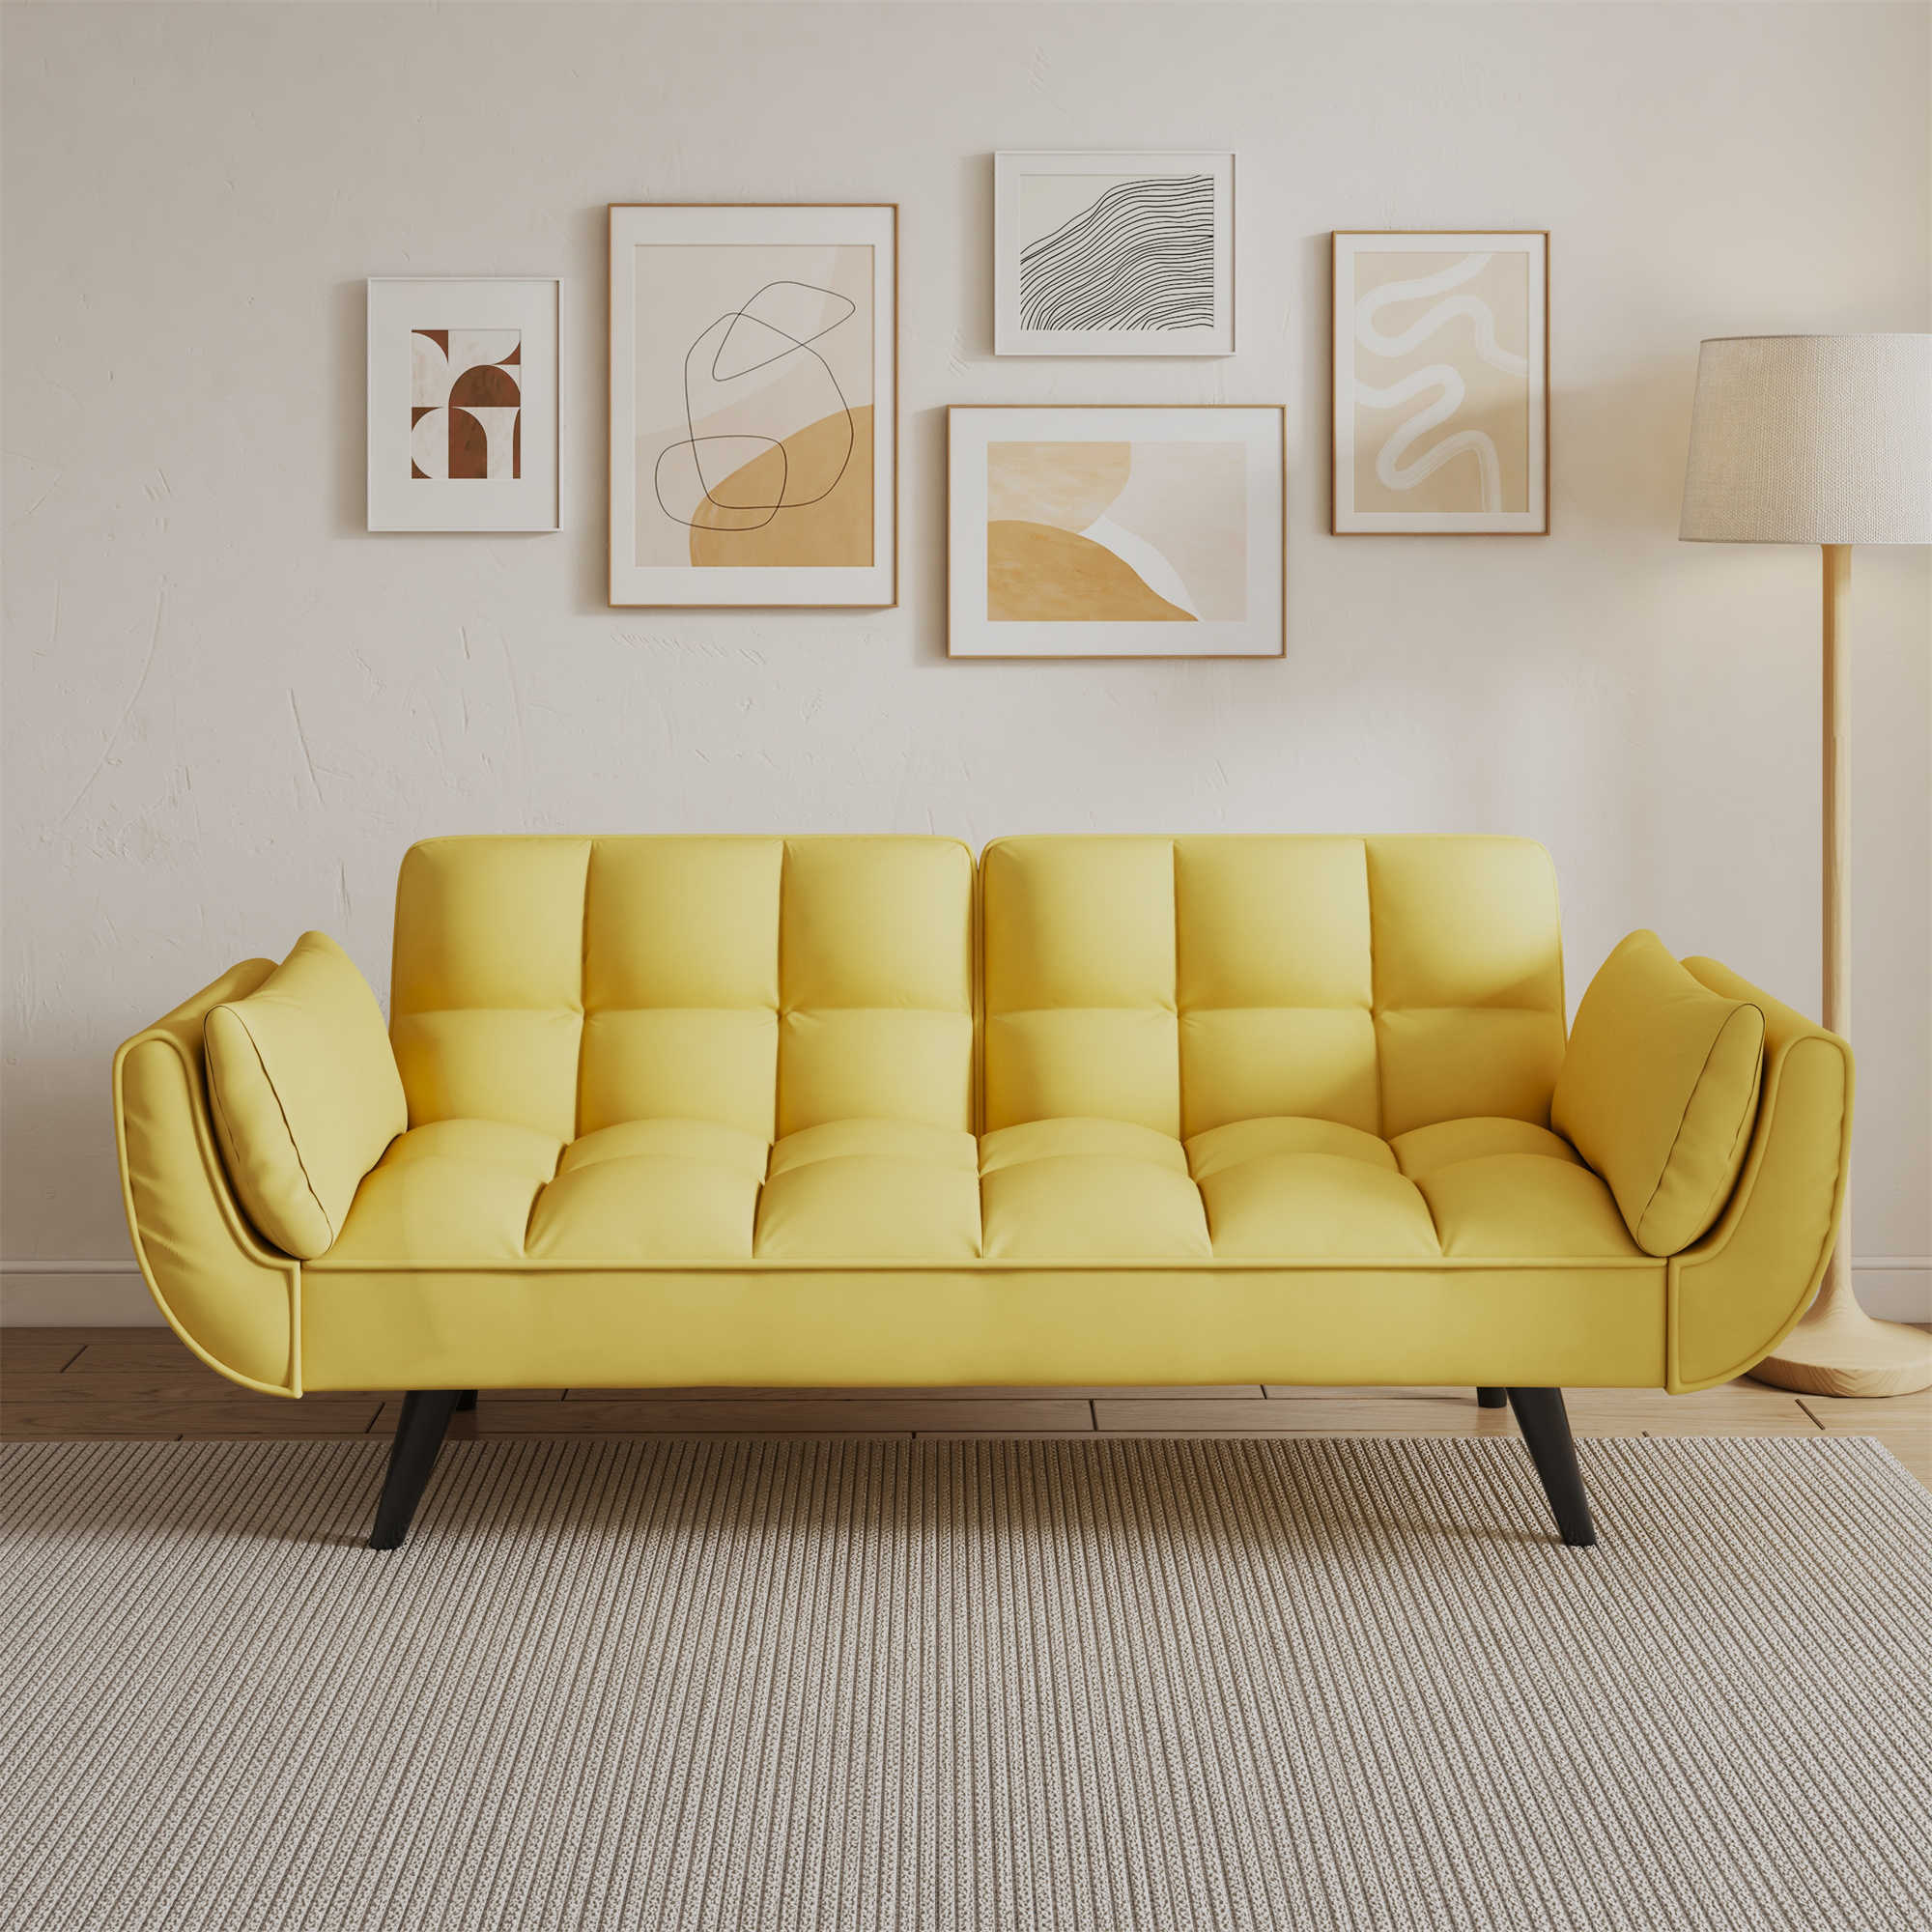 Aukfa 75" Flared Arm Futon Convertible Sofa Bed, Curved Sleeper Sofa for Home Office, Yellow - image 1 of 26